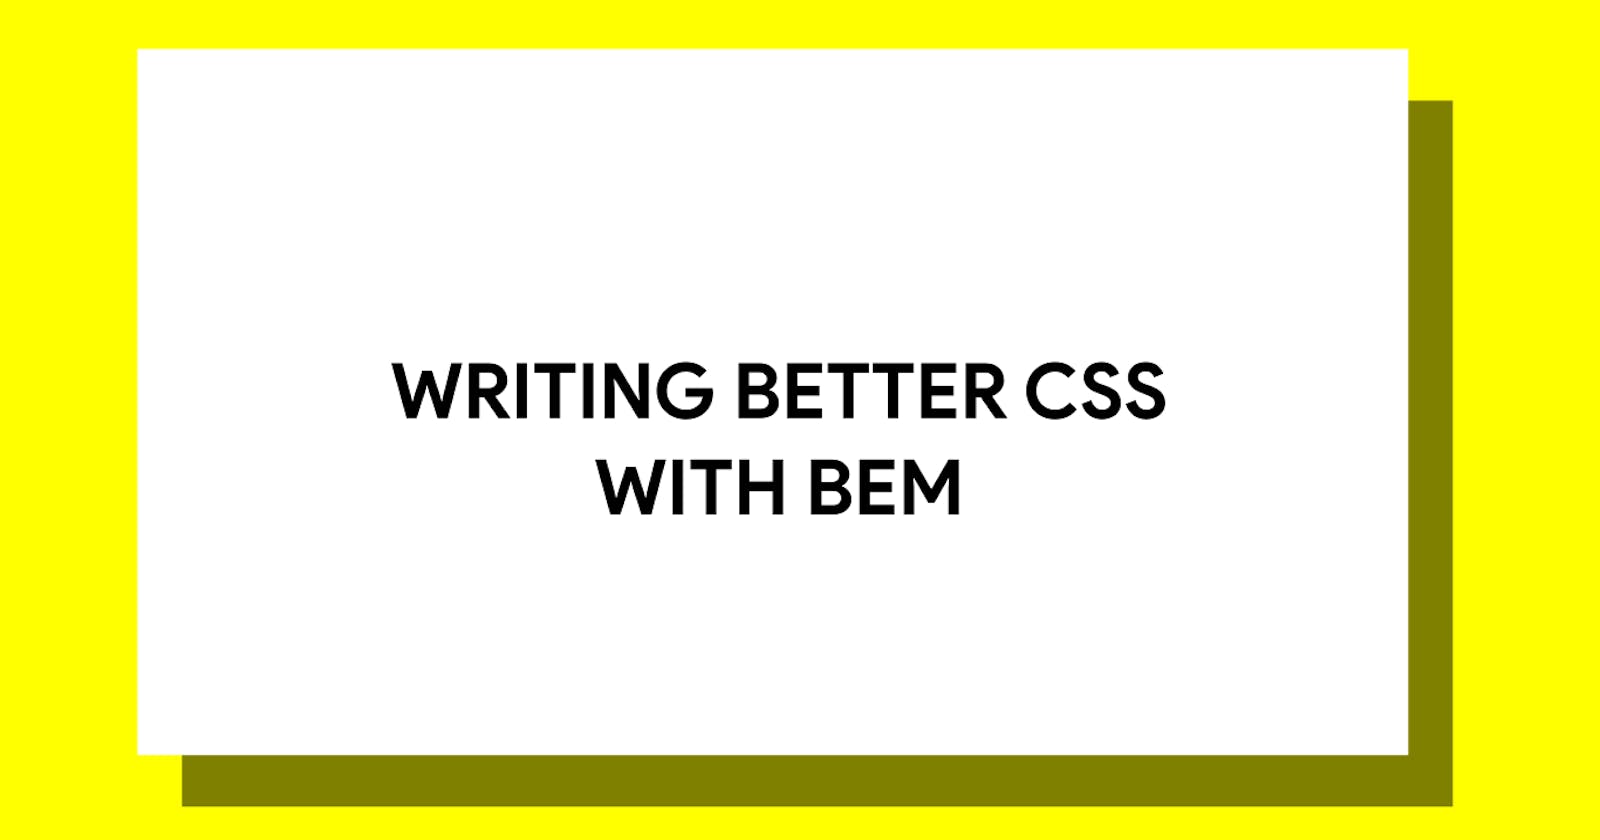 Introduction to writing better CSS with BEM